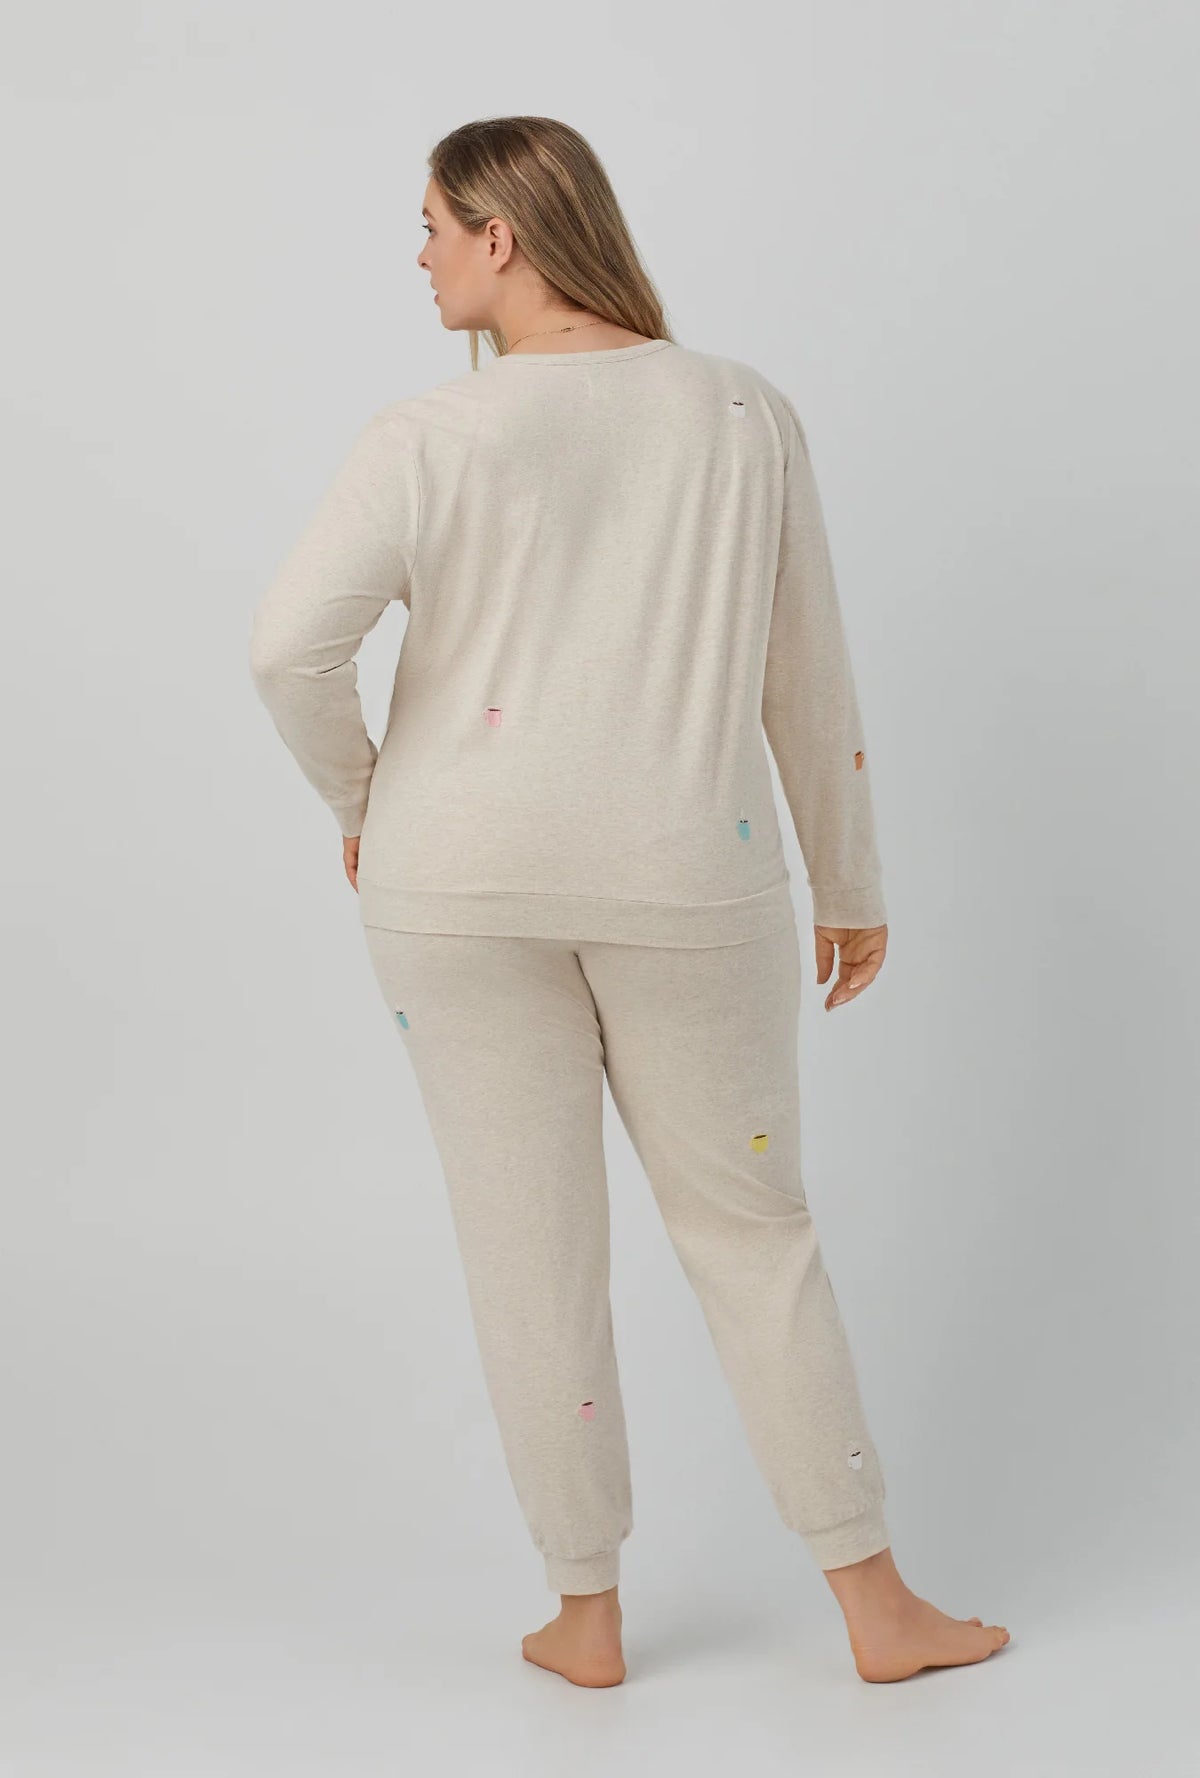 Latte Heather Long Sleeve Pullover Crew and Jogger Stretch Jersey PJ Set